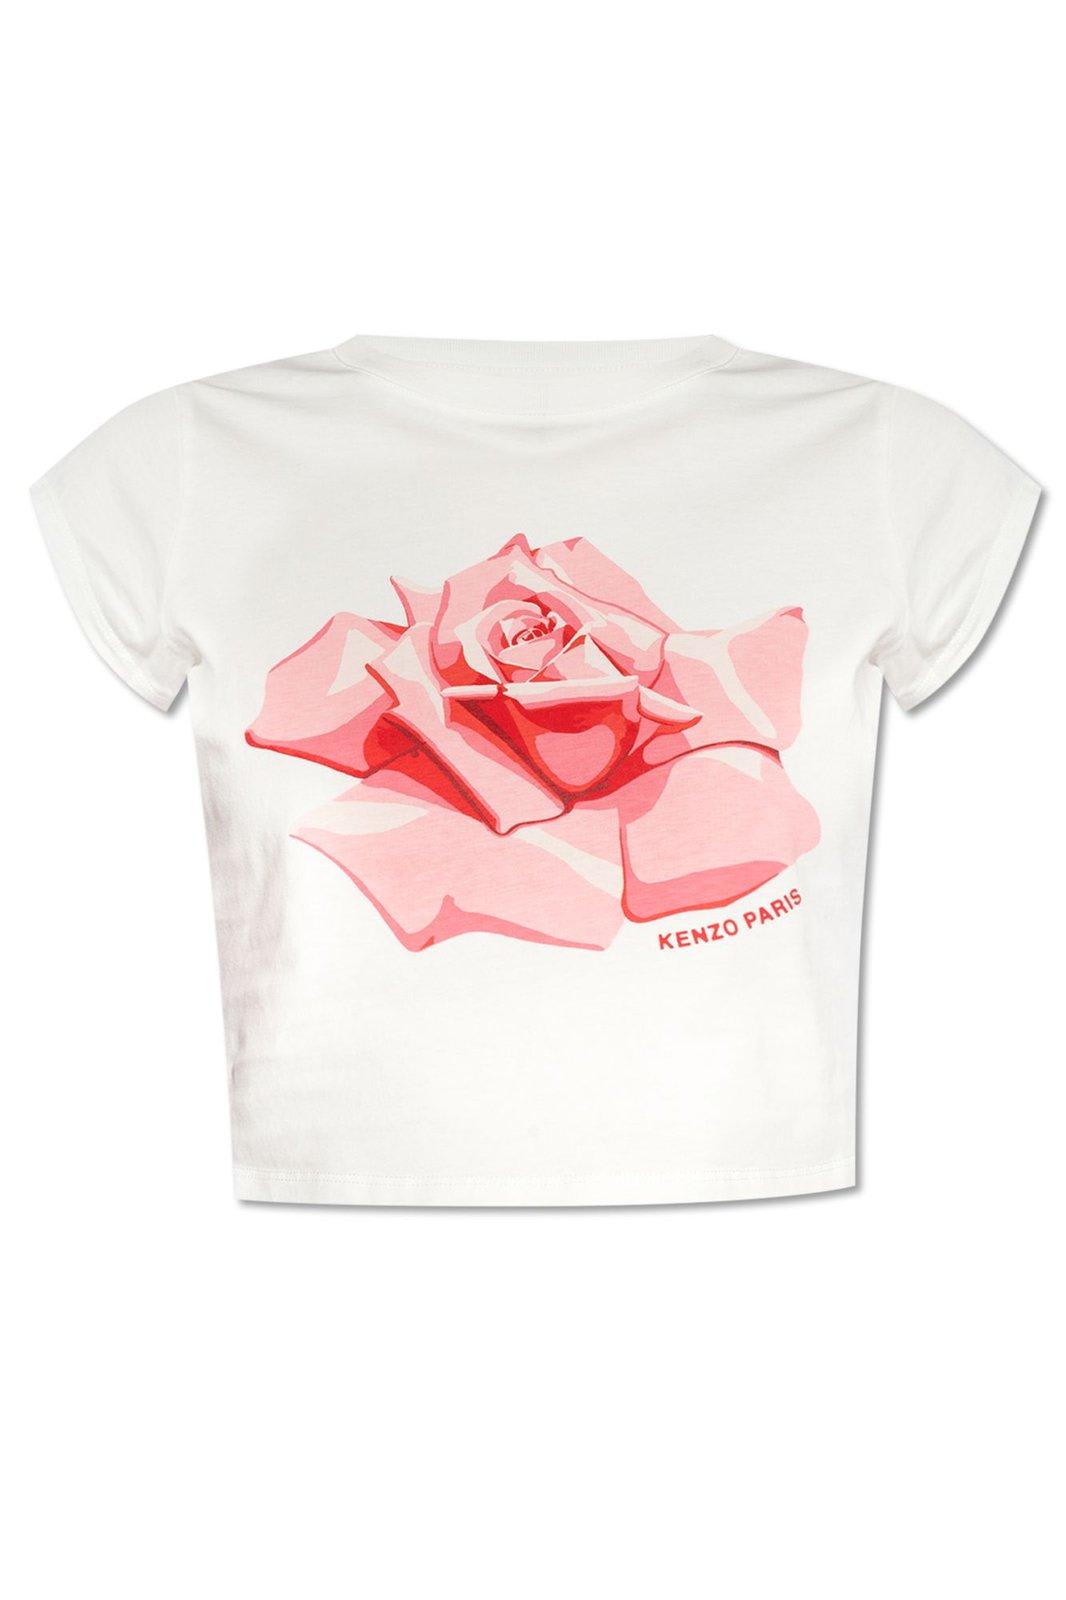 KENZO ROSE BABY FIT T-SHIRT